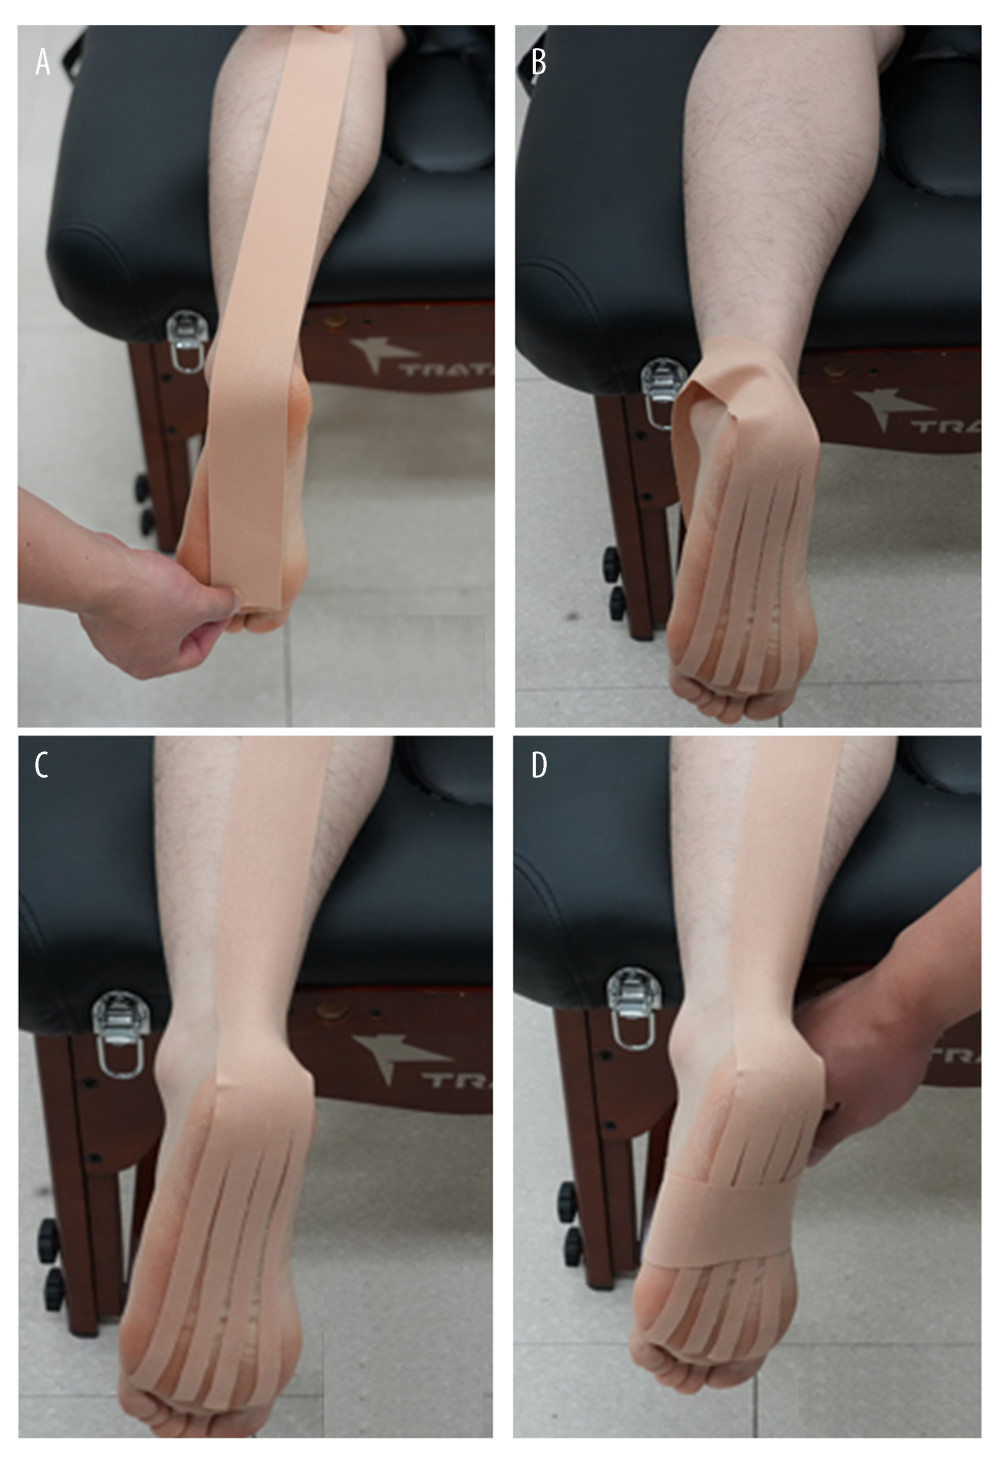 (A–D) Technique to apply of the kinesiology tape with ankle dorsi flexion.